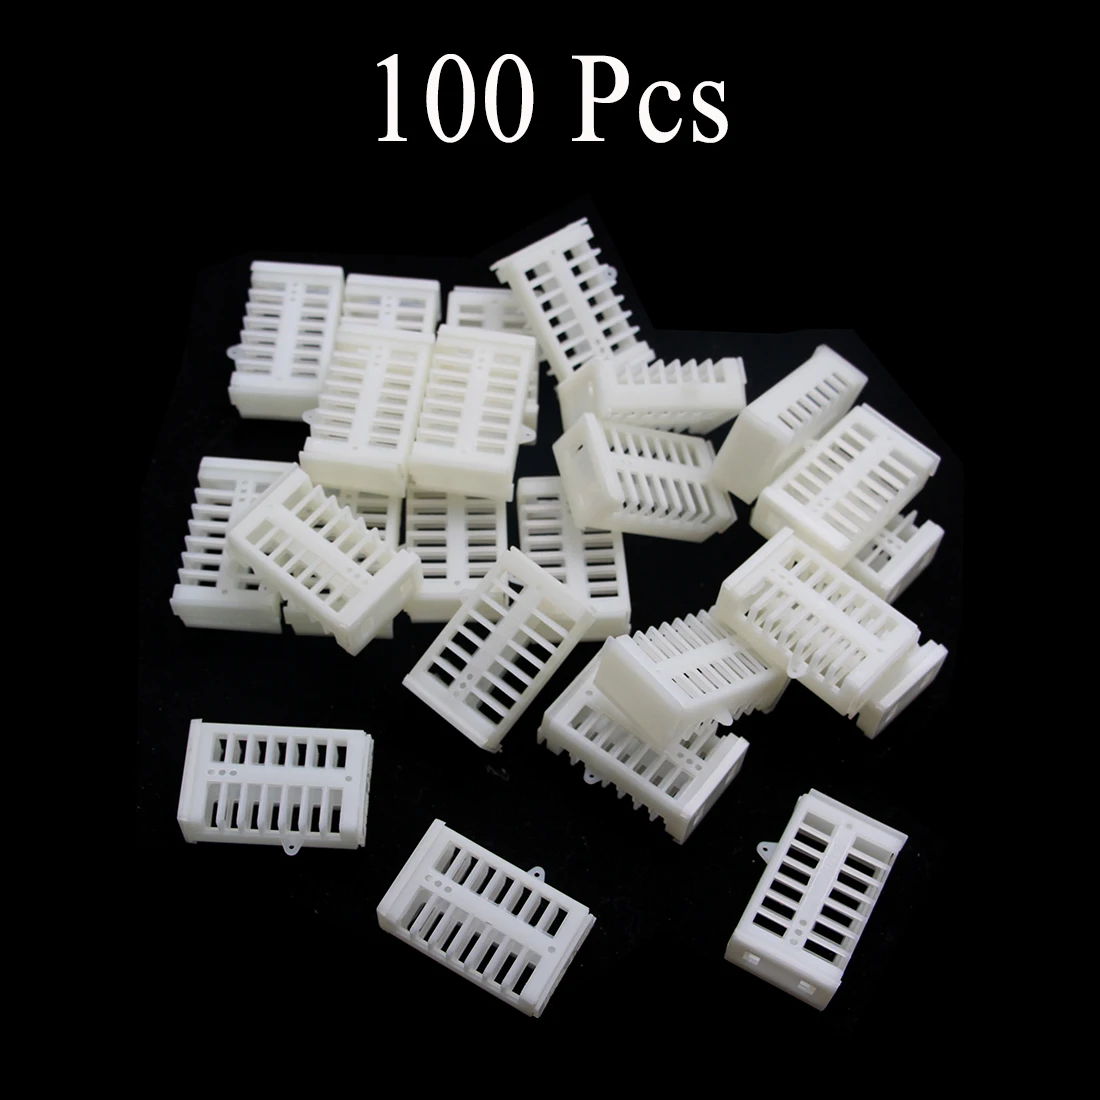 

100PCS Wholesale Pulling Type Bee Farm Rearing Cage Imprison Introduction Virgin Queen Cap Box Beekeeping Tools Supplies